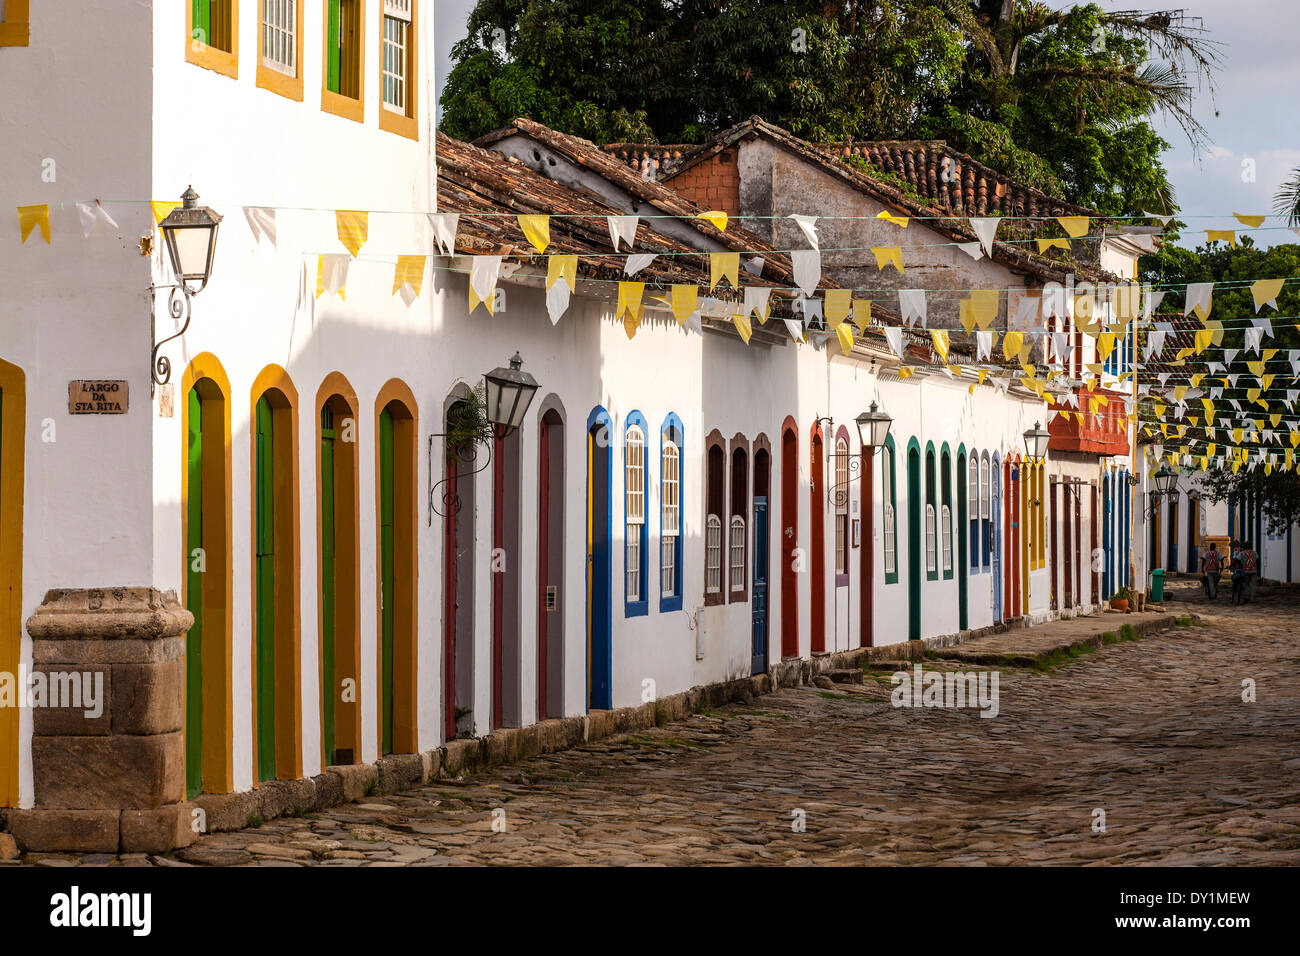 Paraty, colonial town, typical colonial houses in a cobblestone paved street, flags, Rio de Janeiro, Costa Verde, Brazil Stock Photo